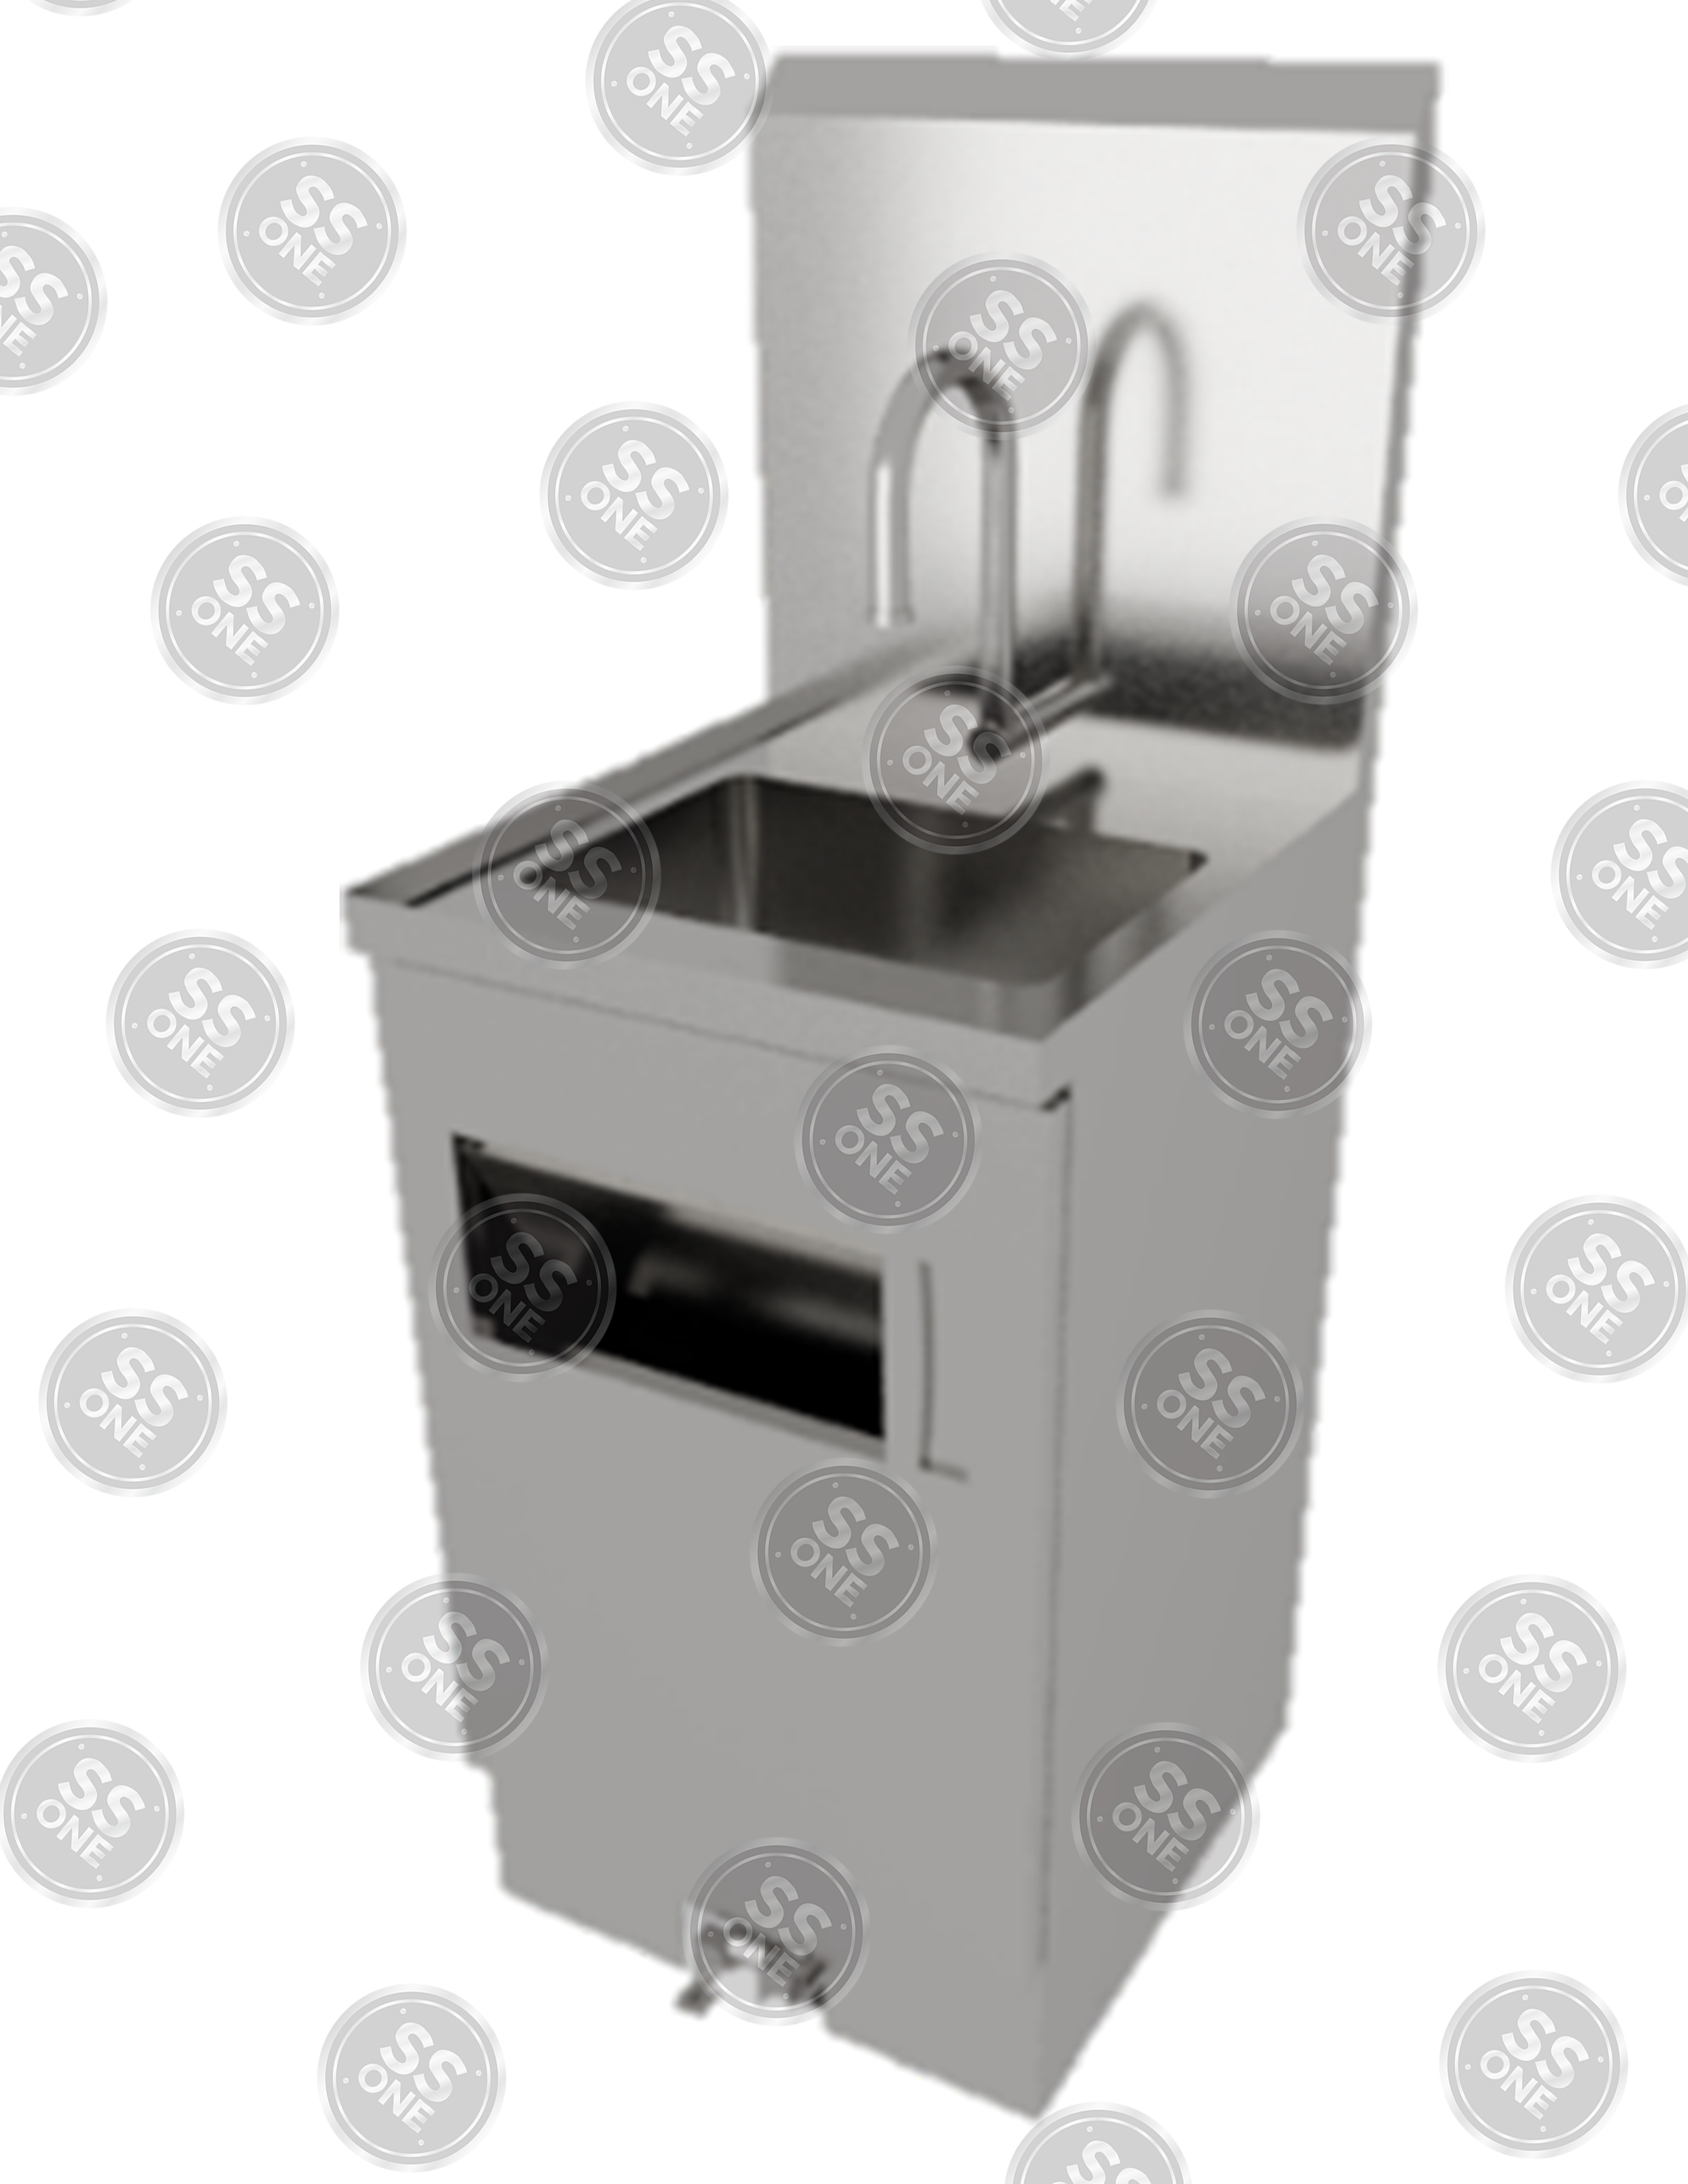 FOOT OPERATED HANDWASHING SINK (WITH BASE CABINET AND FOOT VALVE)